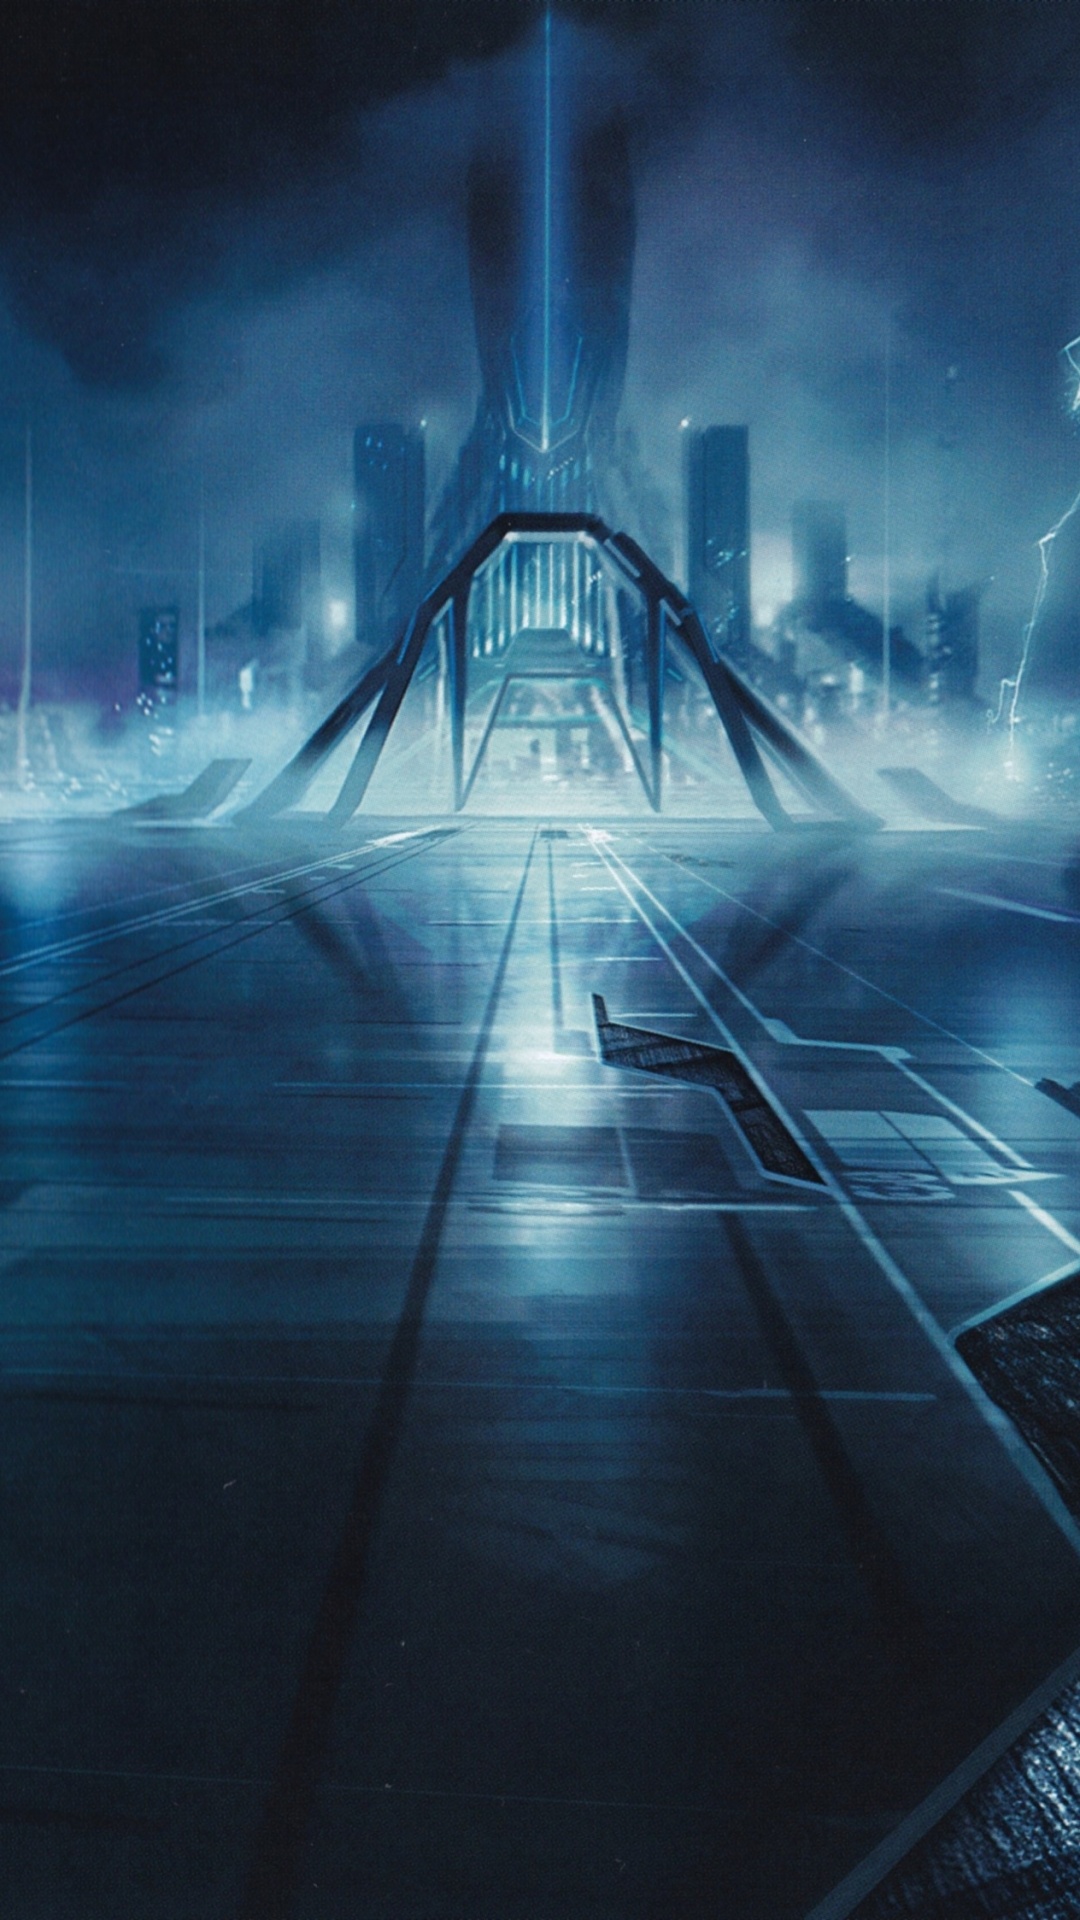 Tron (Movie): Legacy, Principal photography took place in Vancouver in April 2009. 1080x1920 Full HD Wallpaper.